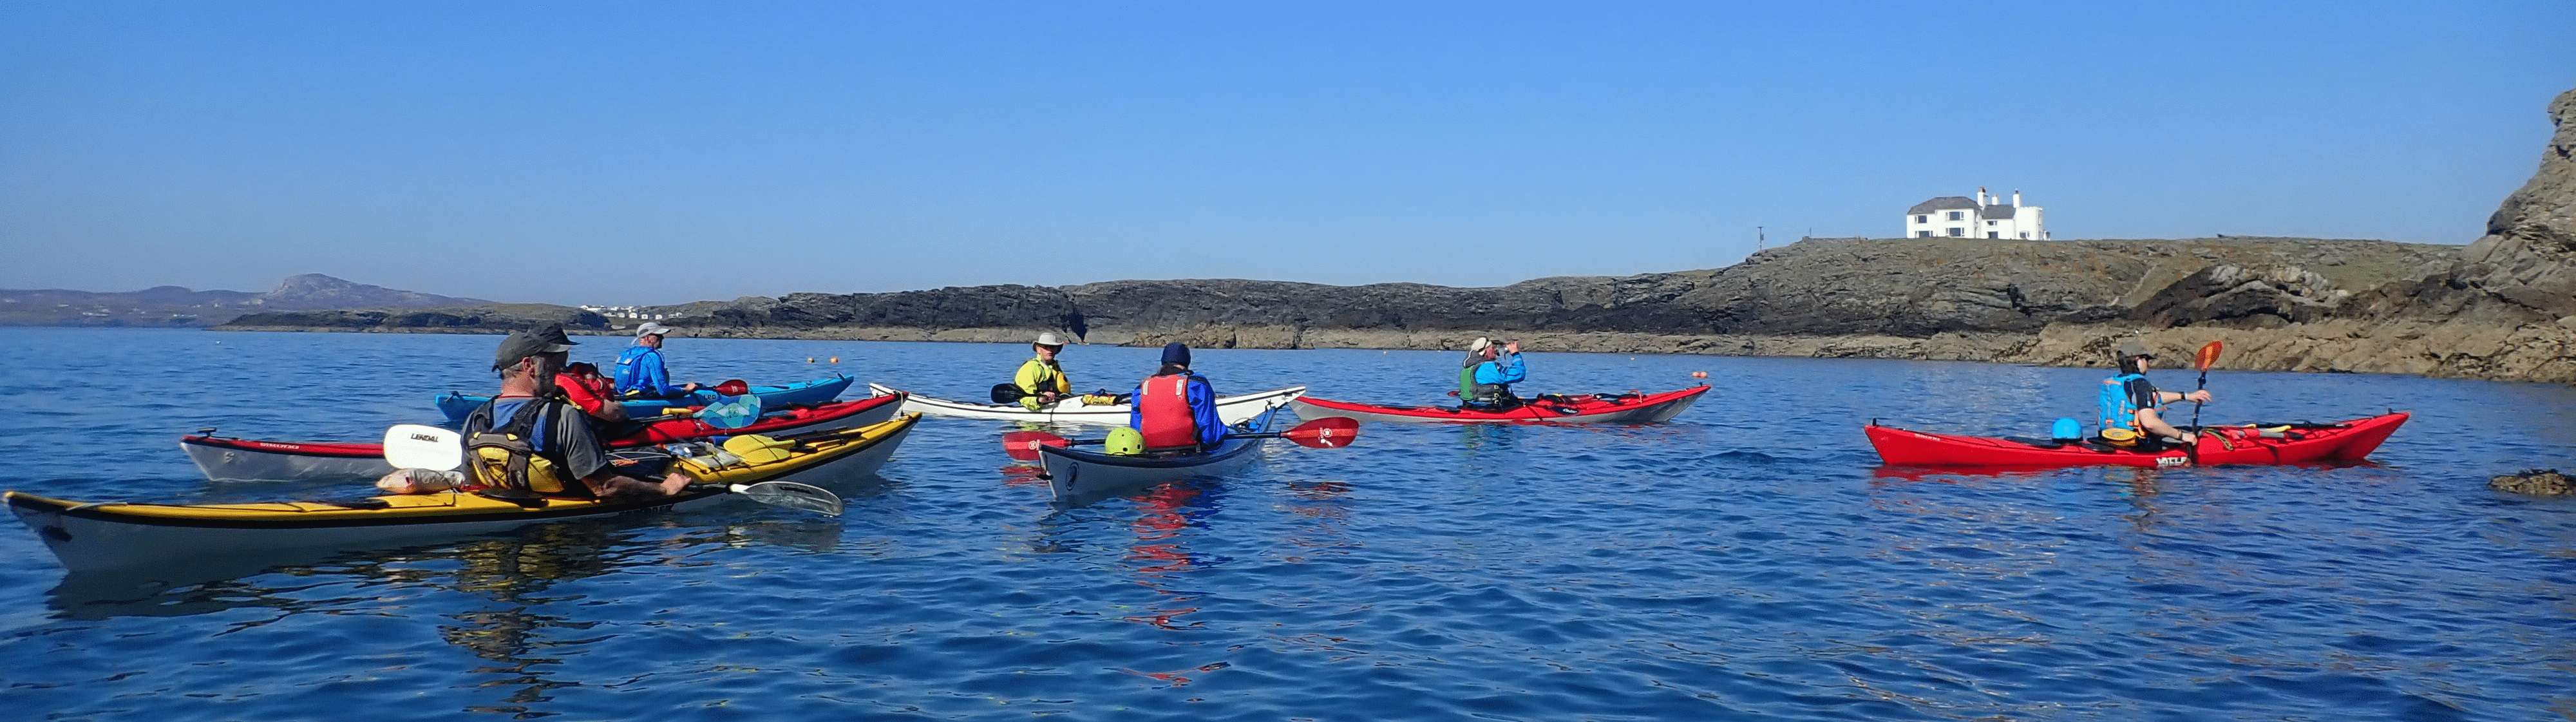 A group of people in kayaks on a lake

Description automatically generated with low confidence